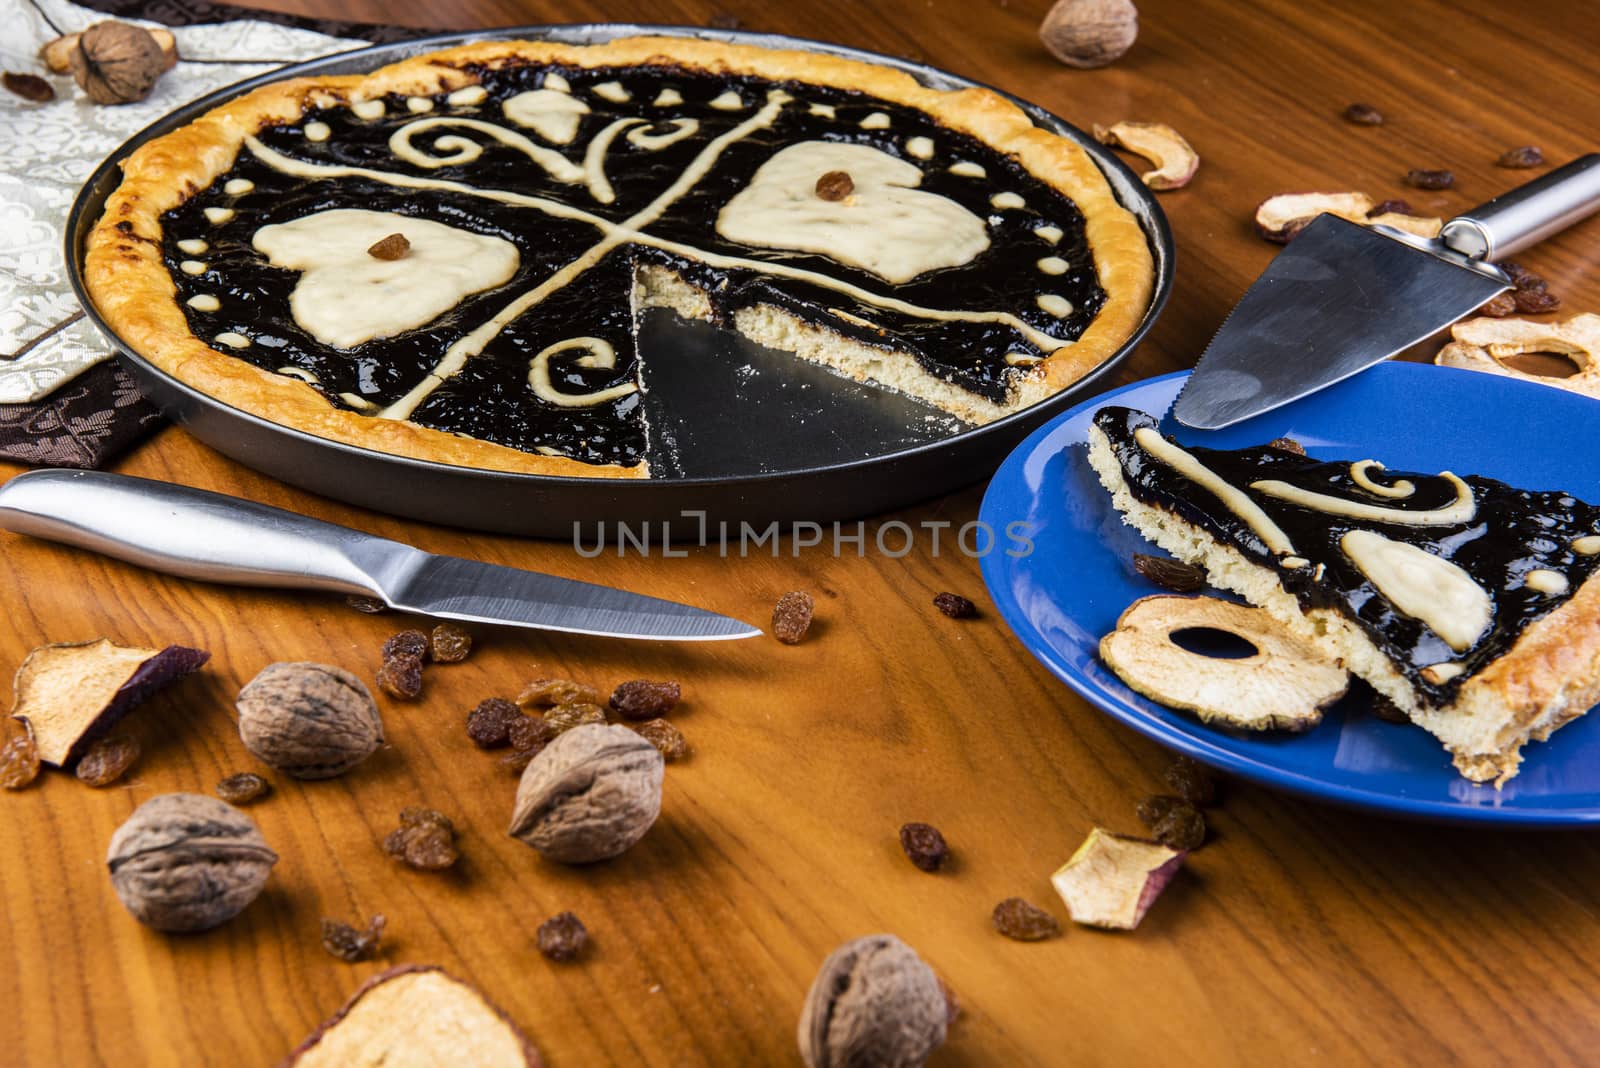 Czech traditional cake "kolac" on a wooden table by fyletto